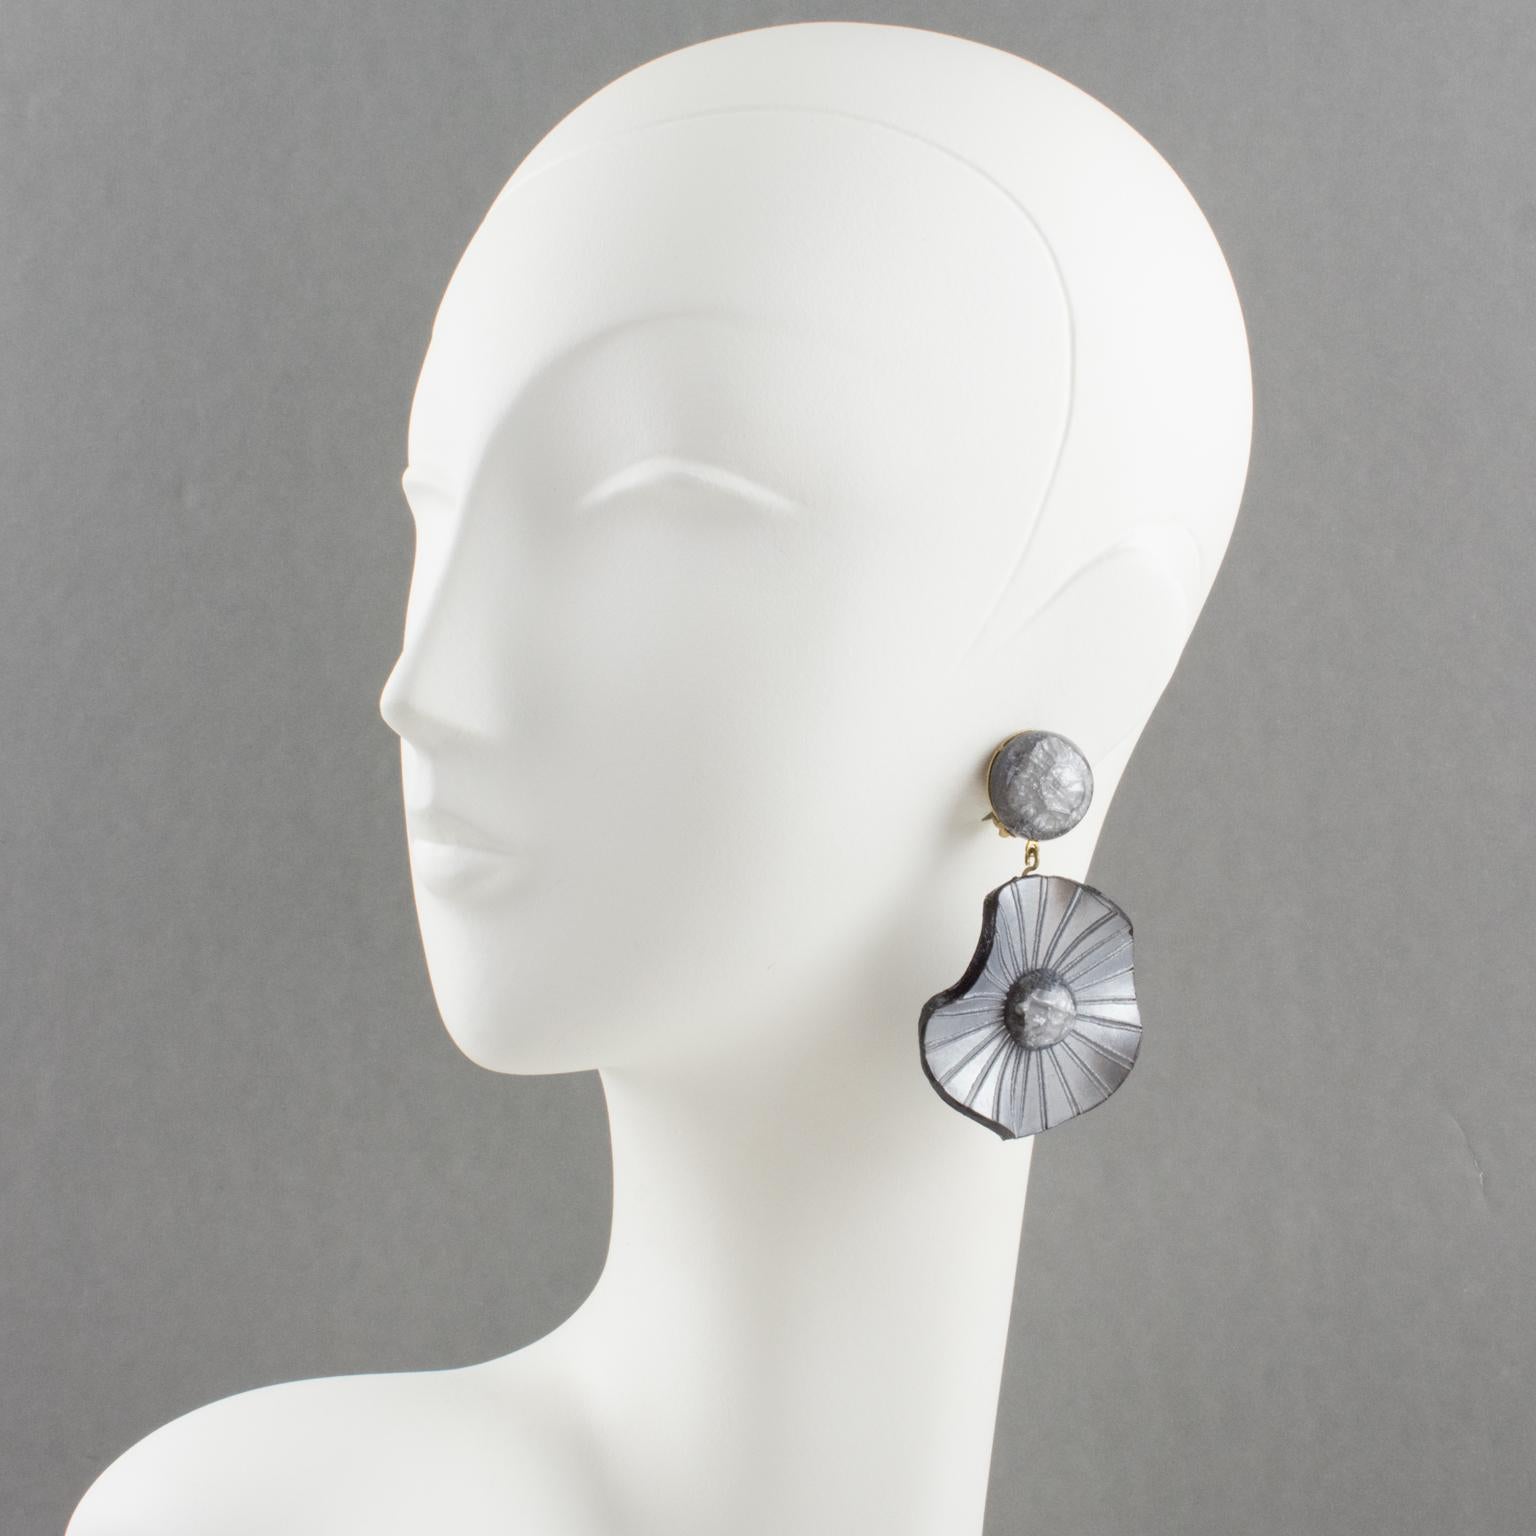 These exquisite French designer Francoise Montague resin clip-on earrings were created by Cilea Paris. They feature a unique dangling shape, all carved, textured, and waved floral disks in pearlized gray color and transparent half beads with